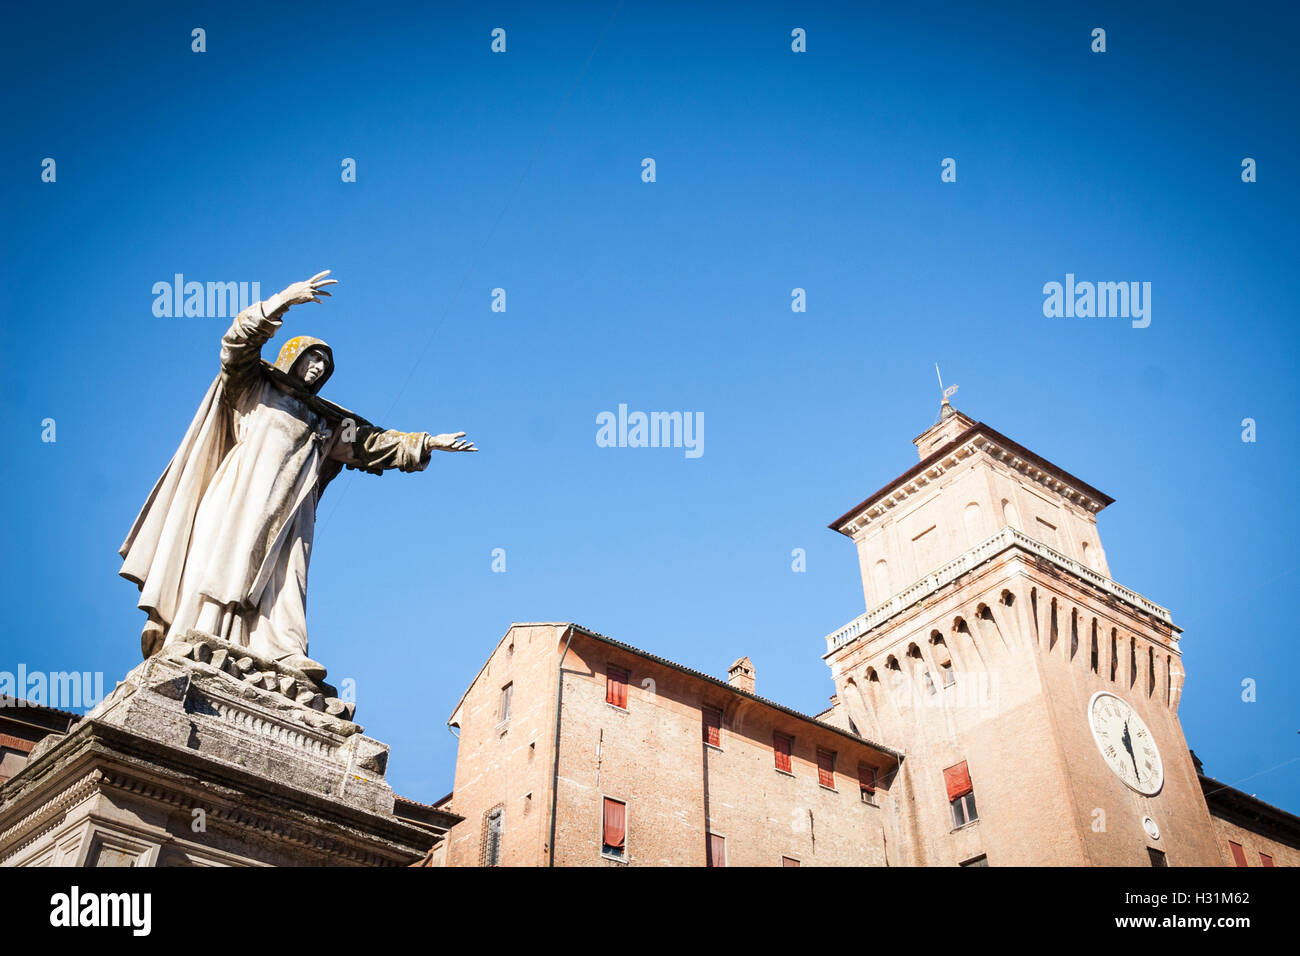 View of Castle Estense or Castle of St Michael from Piazza Savonarola, with statue of monk in foreground, Ferrara Stock Photo